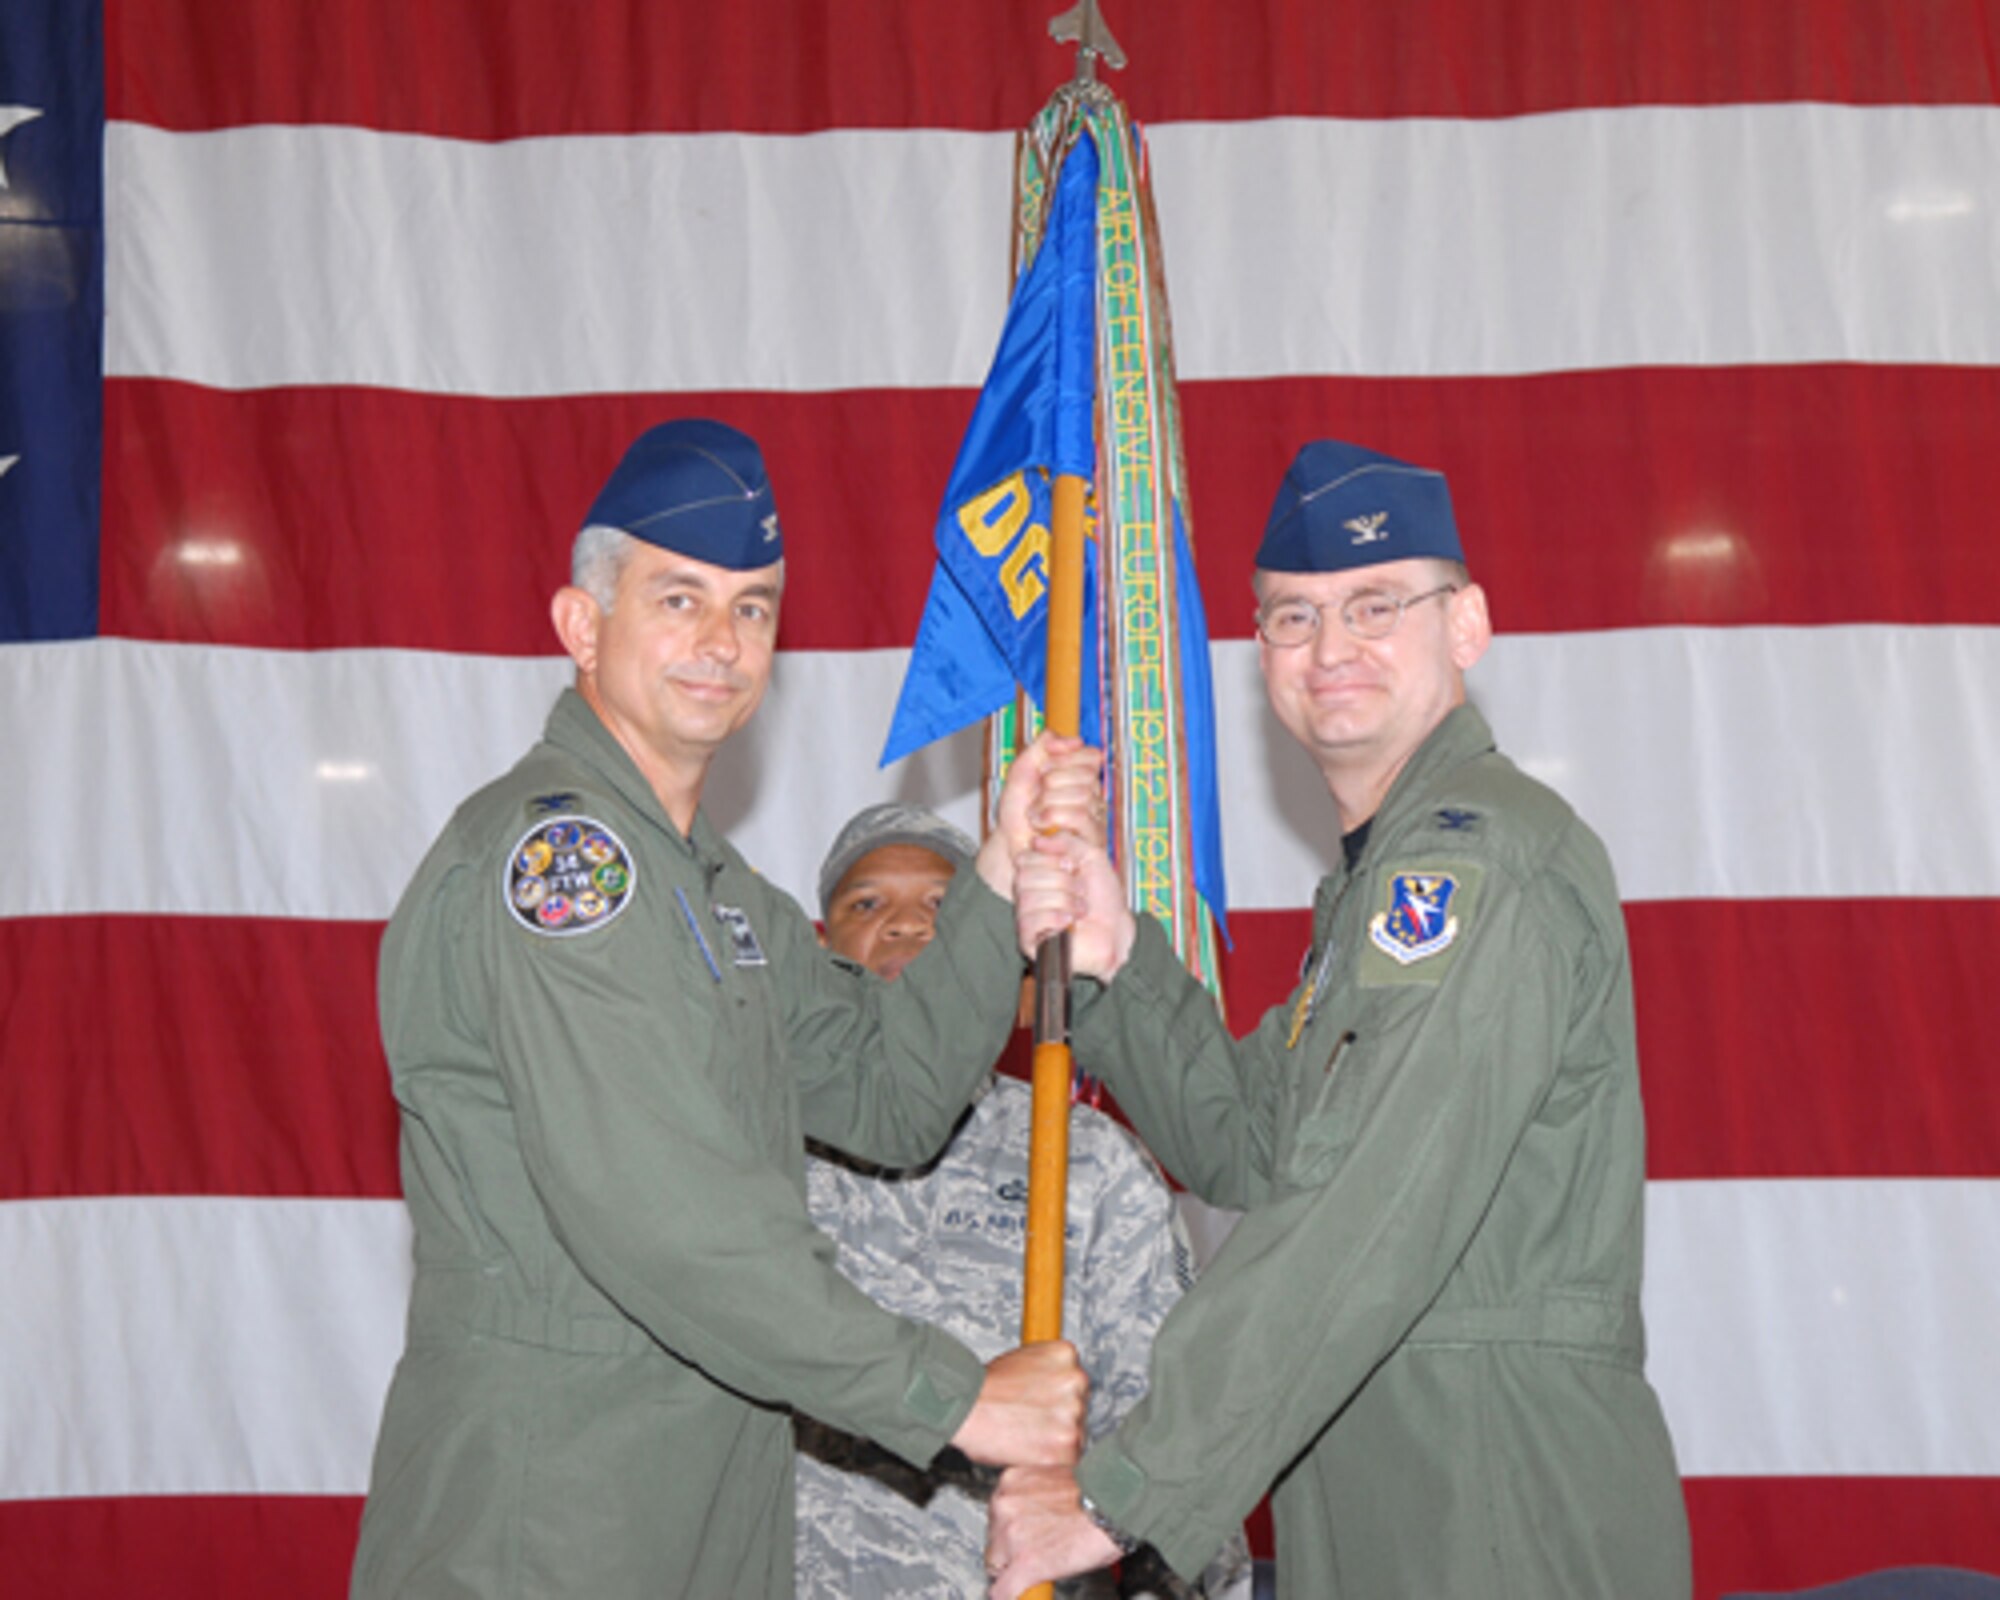 Colonel Roger Watkins, 14th Flying Training Wing commander, presents Col. David Reth the 14th Operations Group guidon upon assuming command of the 14th OG in a ceremony held in Hangar 6, the Louis C. Malloy Hangar Wednesday. Colonel Reth was previously the deputy commander of USAFE Detachment 5 Operating Location – Alpha at Ramstein AB, Germany. (U.S. Air Force photo by Melissa Duncan)